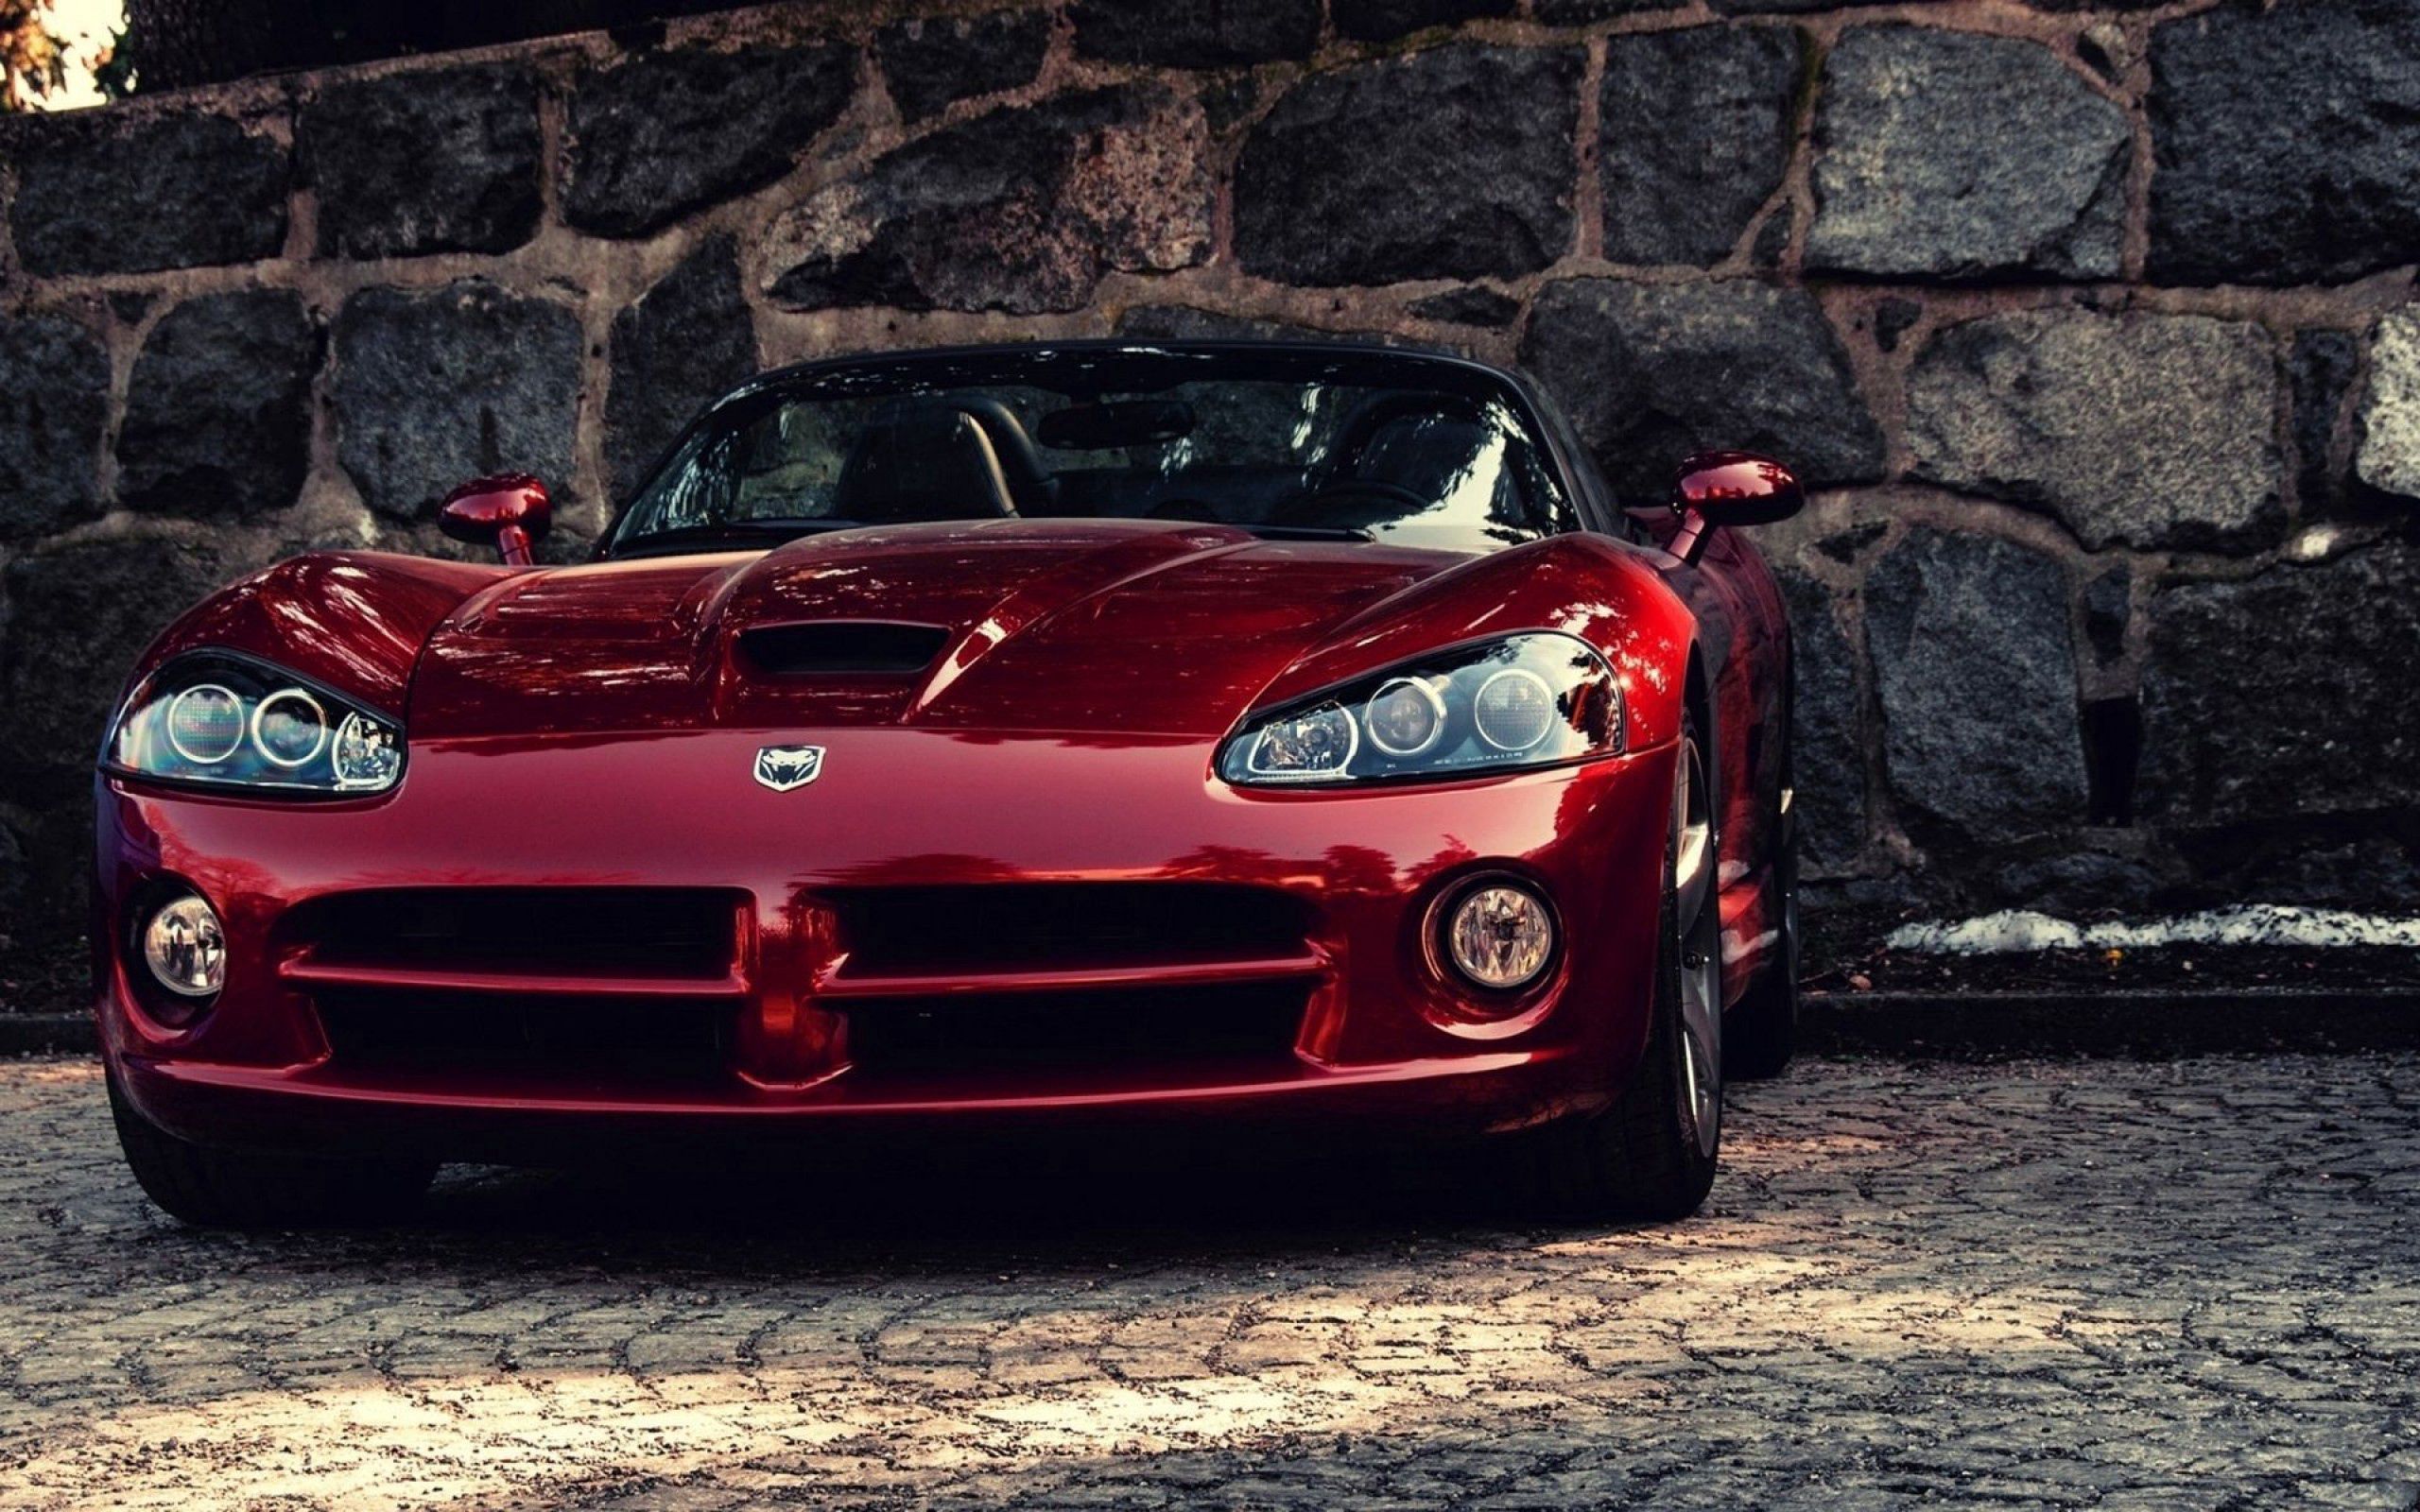 Best Dodge Viper wallpapers for phone screen